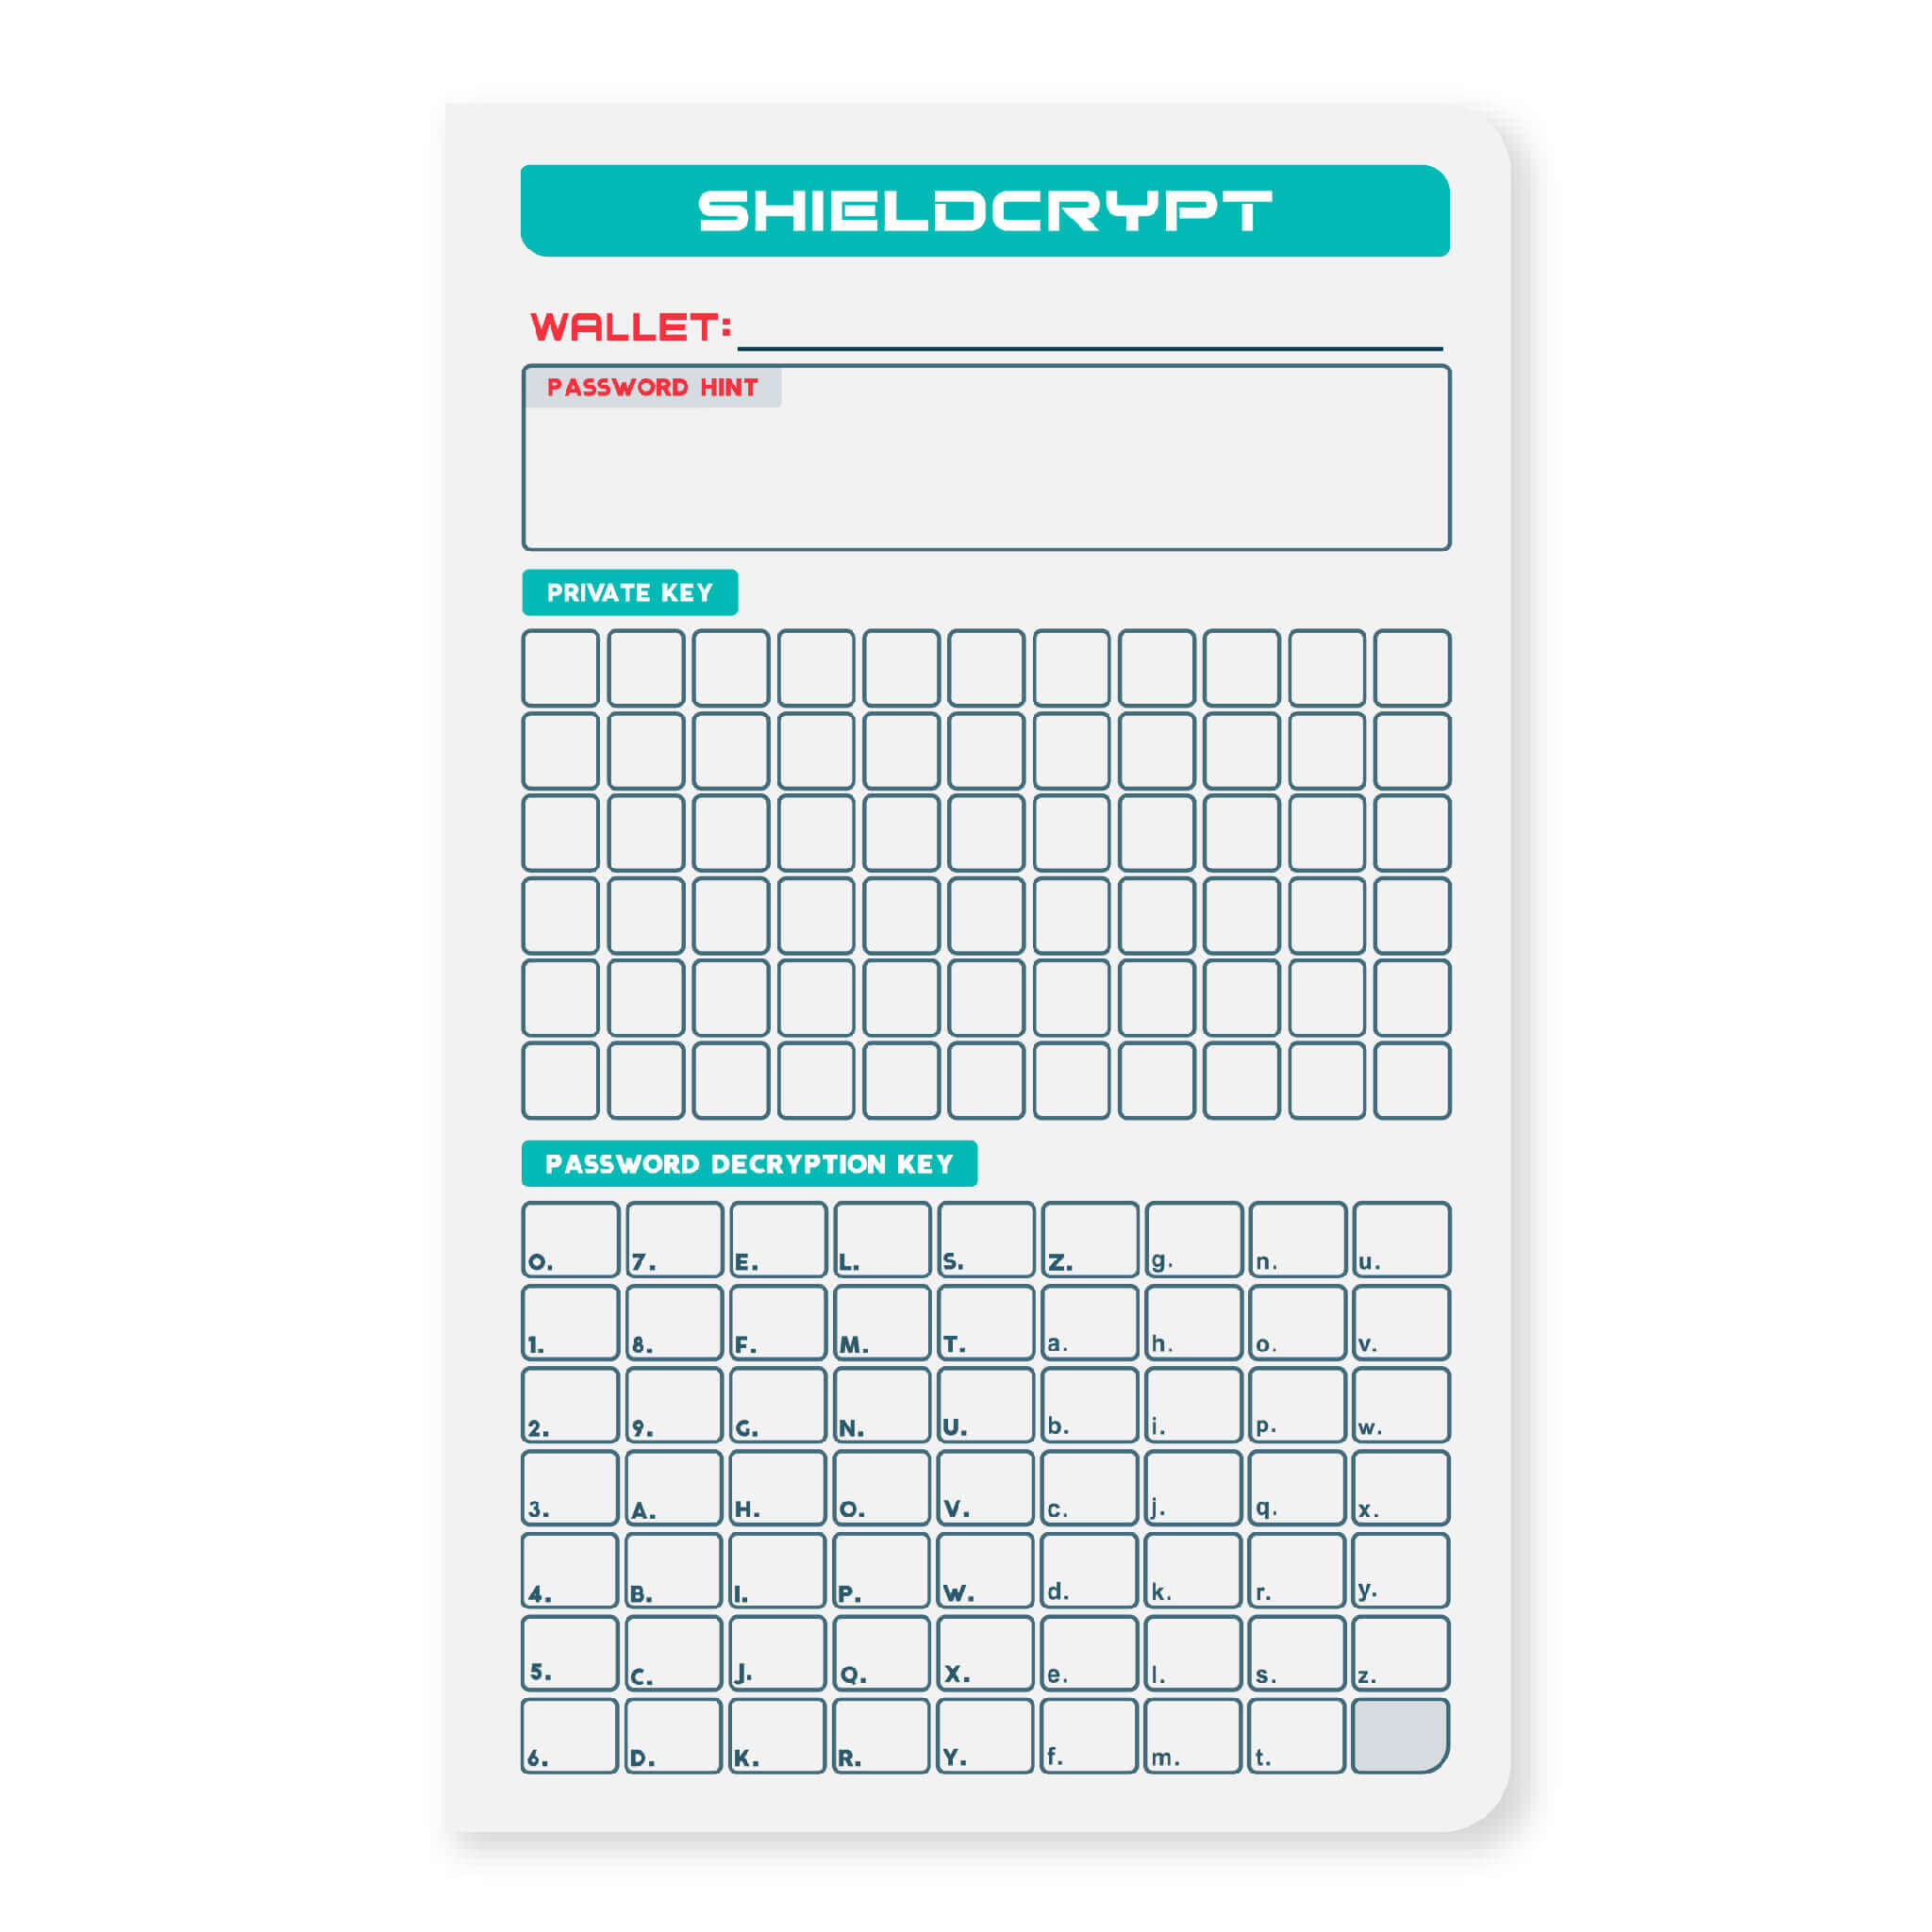 A page from the Stonebook ™ Notebook to encrypt your private key with shieldcrypt using a password description key to keep your information private